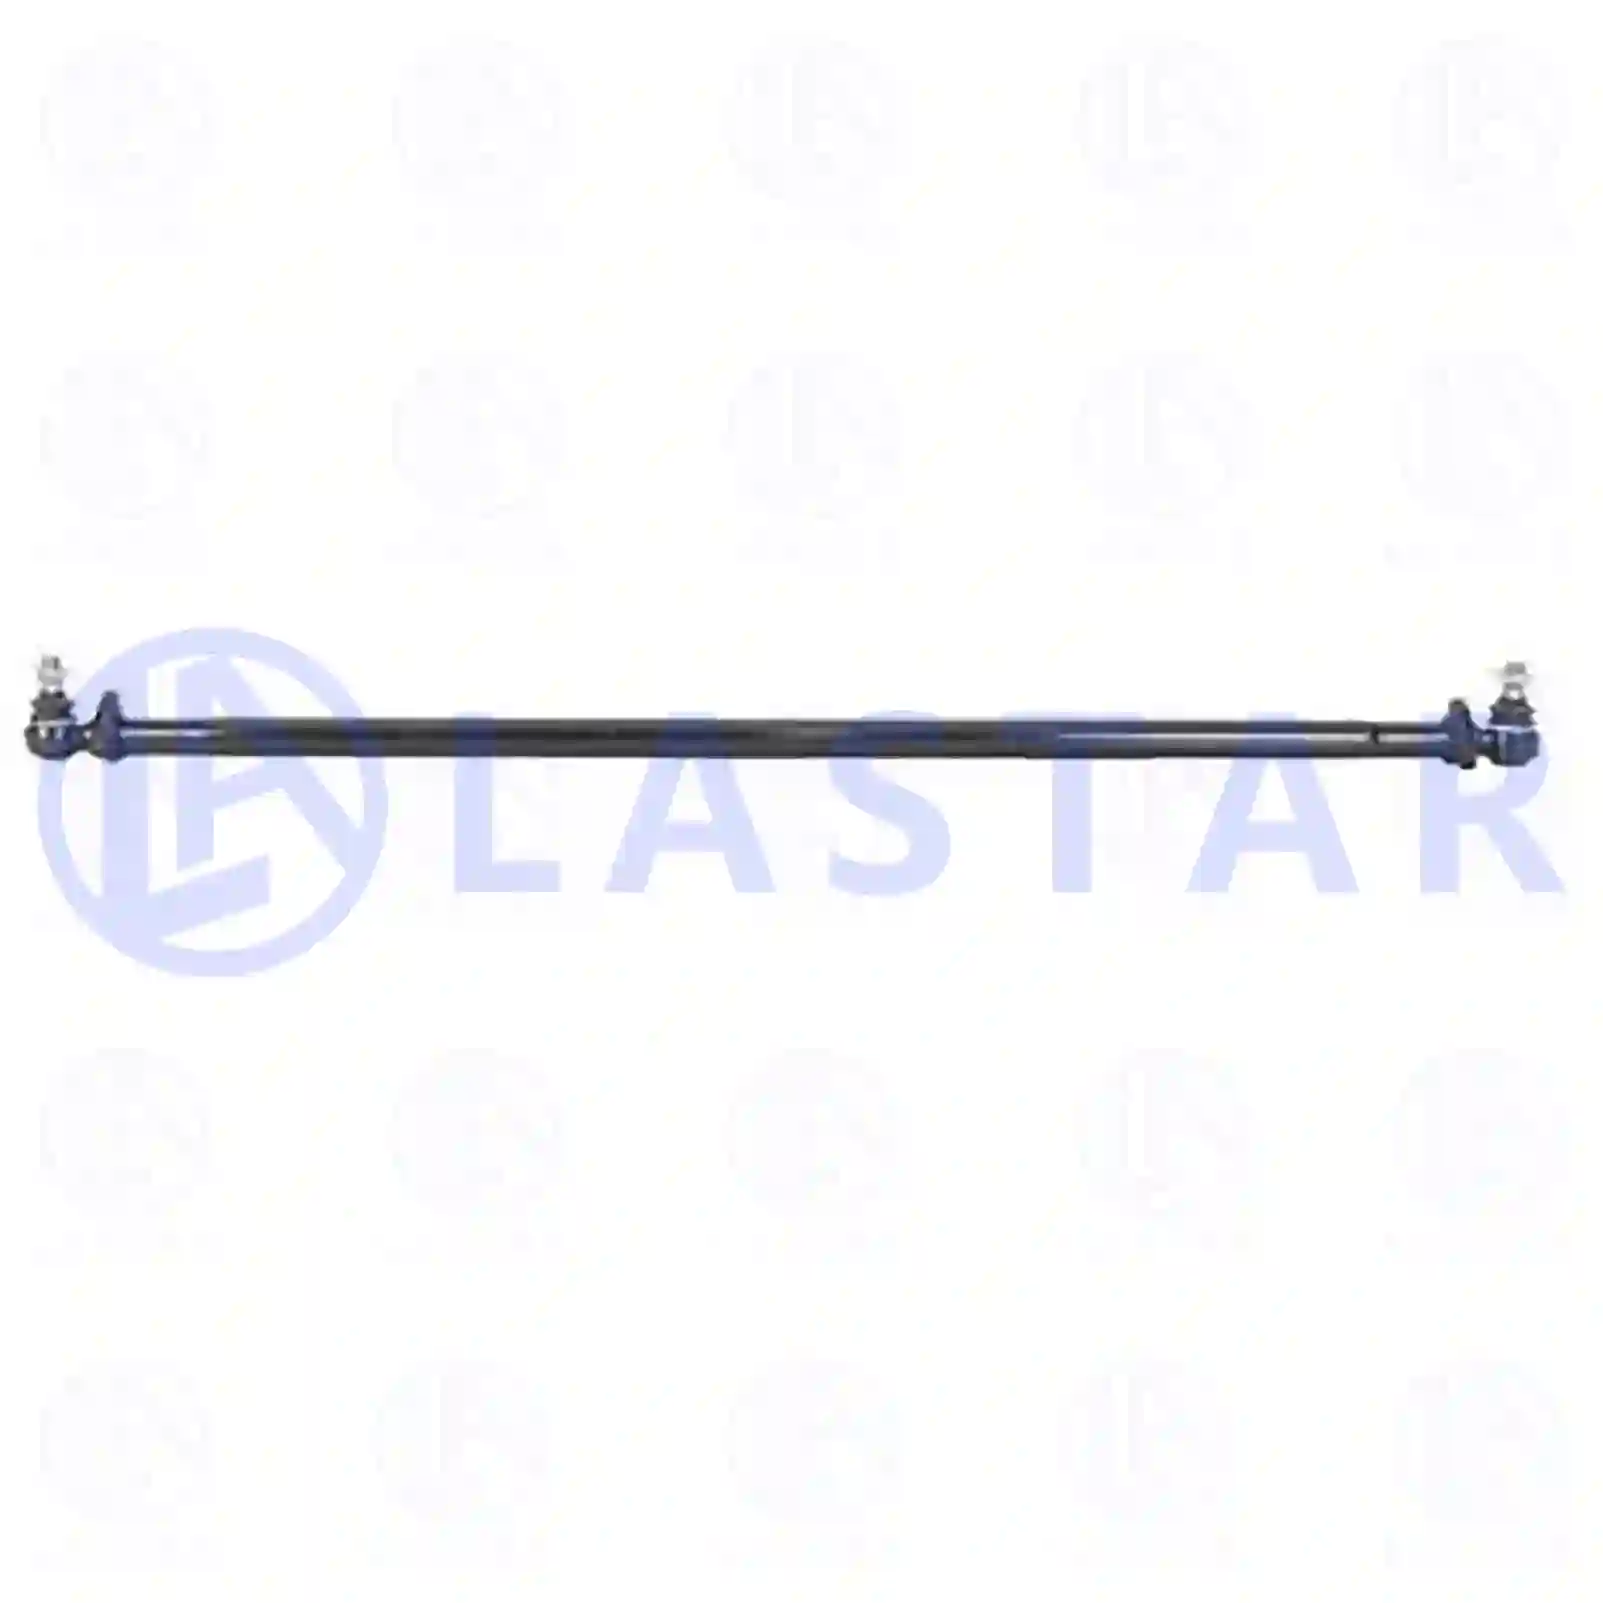 Track rod, 77730741, 6763300303, 6763300503, 6763300803, 6763301003, , ||  77730741 Lastar Spare Part | Truck Spare Parts, Auotomotive Spare Parts Track rod, 77730741, 6763300303, 6763300503, 6763300803, 6763301003, , ||  77730741 Lastar Spare Part | Truck Spare Parts, Auotomotive Spare Parts